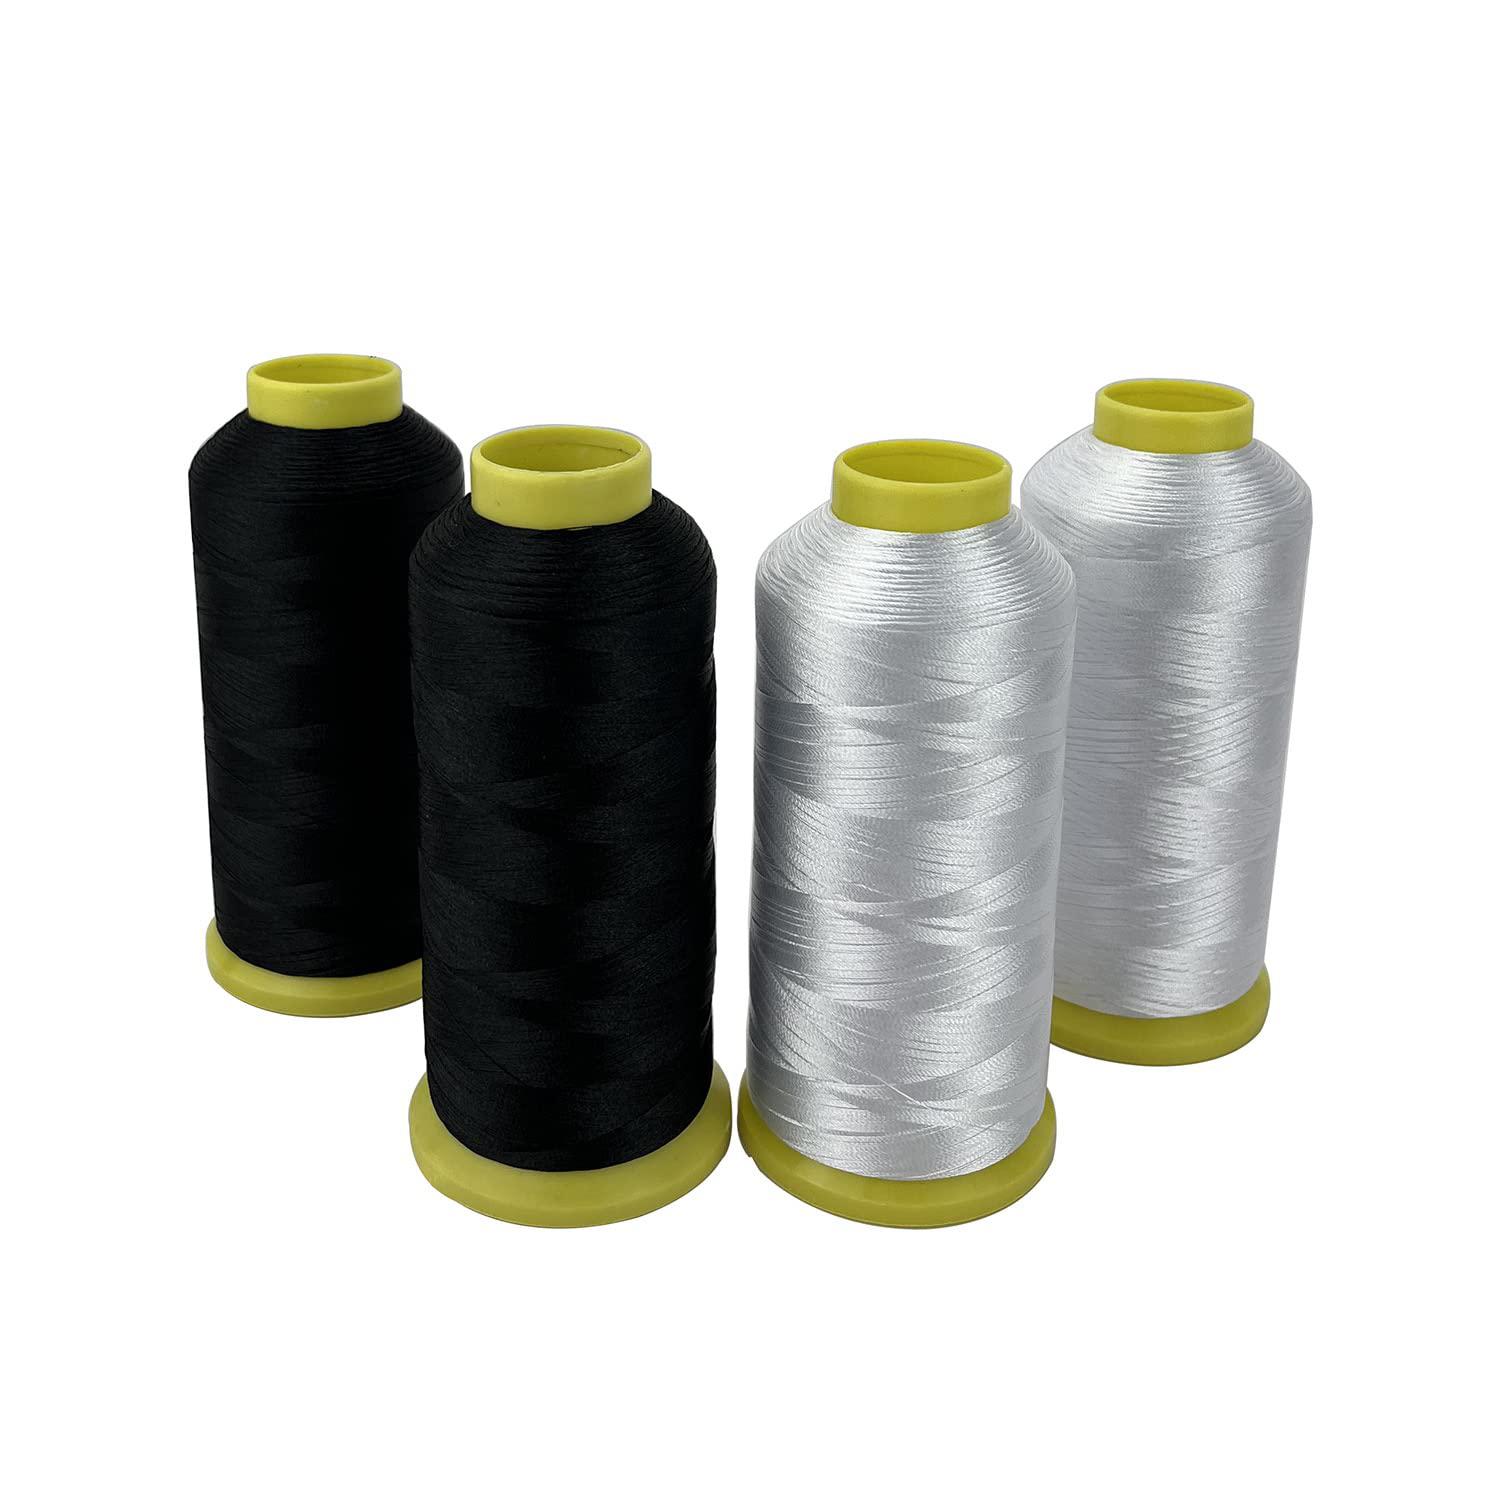 wennuo black and white embroidery machine thread polyester large thread  spool kit 5500 yard (5000m) for sewing and embroidery machin